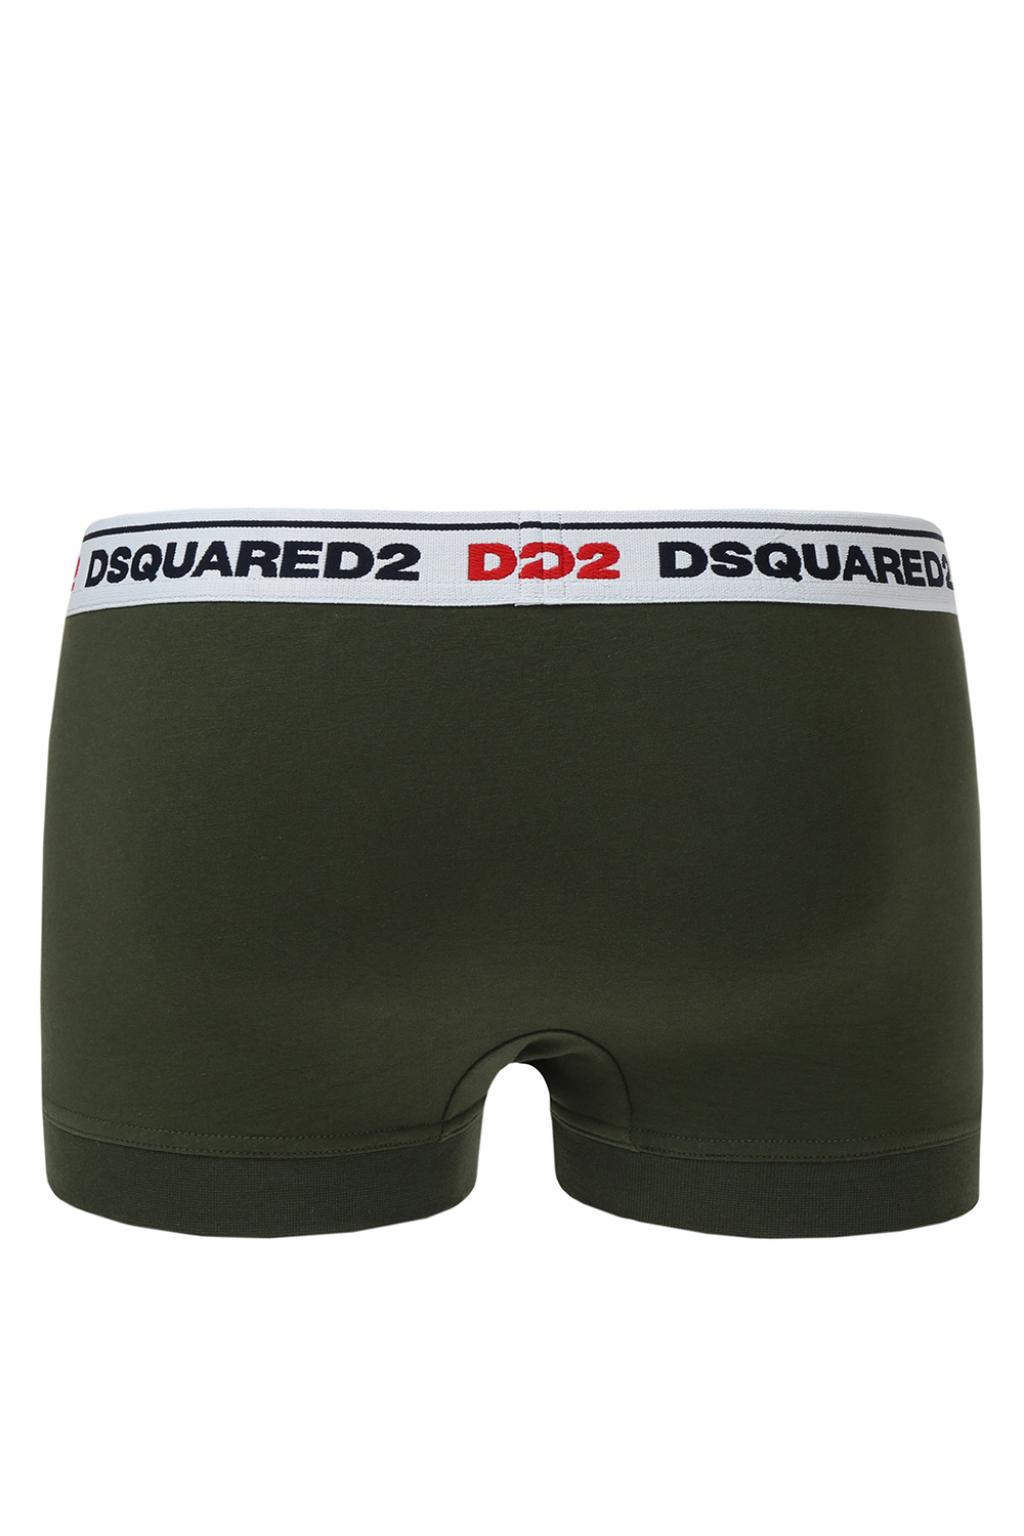 dsquared boxers